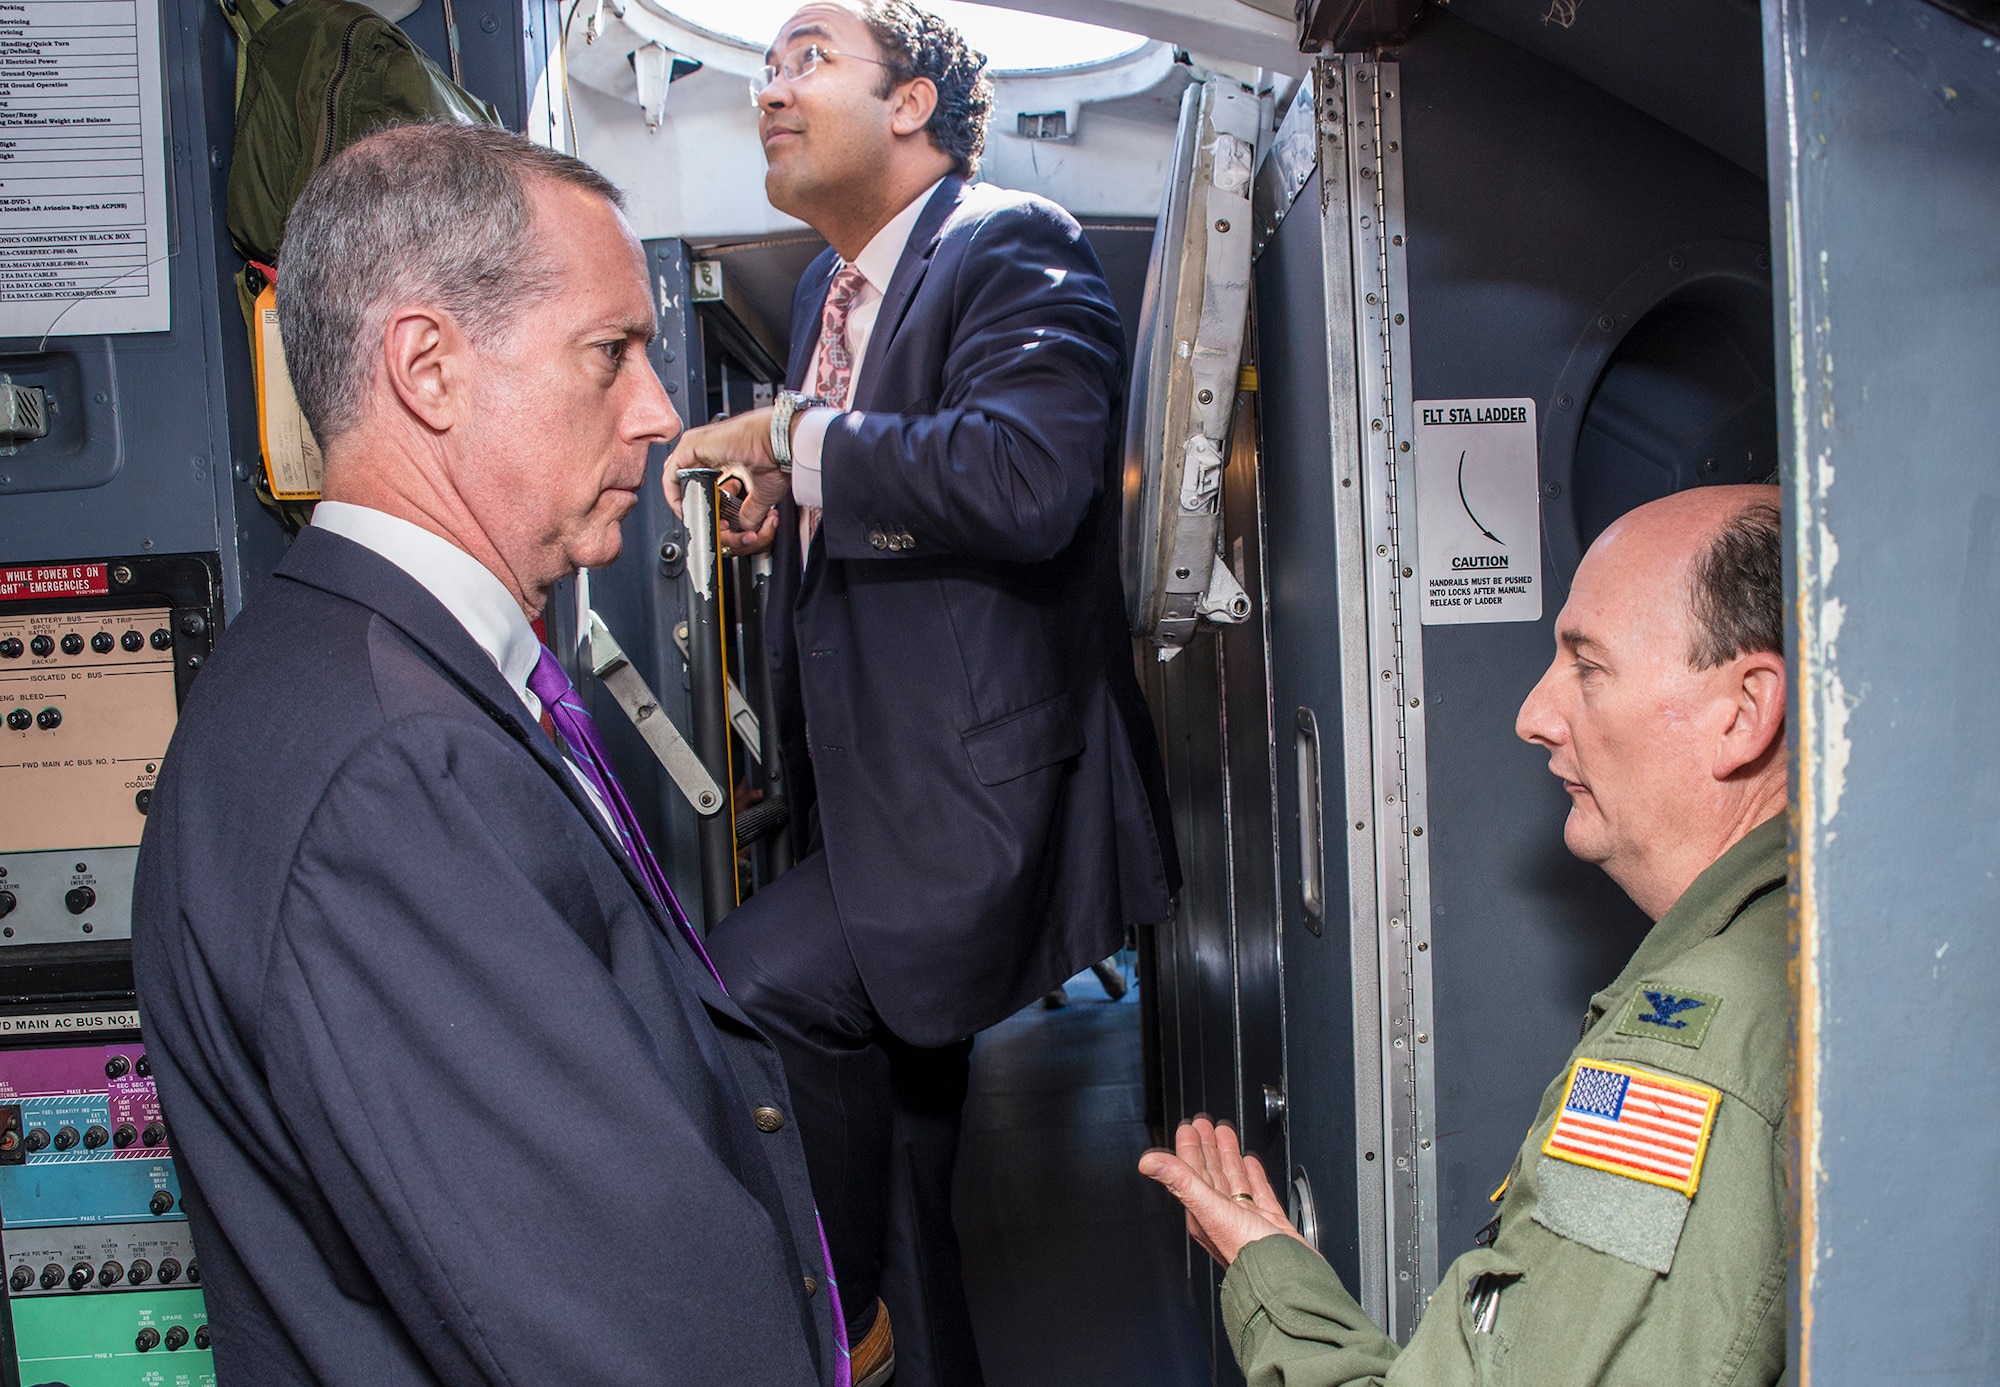 U.S. Rep.William Hurd, 23rd District of Texas, U.S. Rep. Mac Thornberry, 13th District of Texas, and Col. Thomas Smith, 433rd Airlift Wing commander, tour the flight deck of a C-5M Super Galaxy aircraft May 3, 2016 at Joint Base San Antonio-Lackland, Texas. (U.S. Air Force photo by Benjamin Faske) (released)